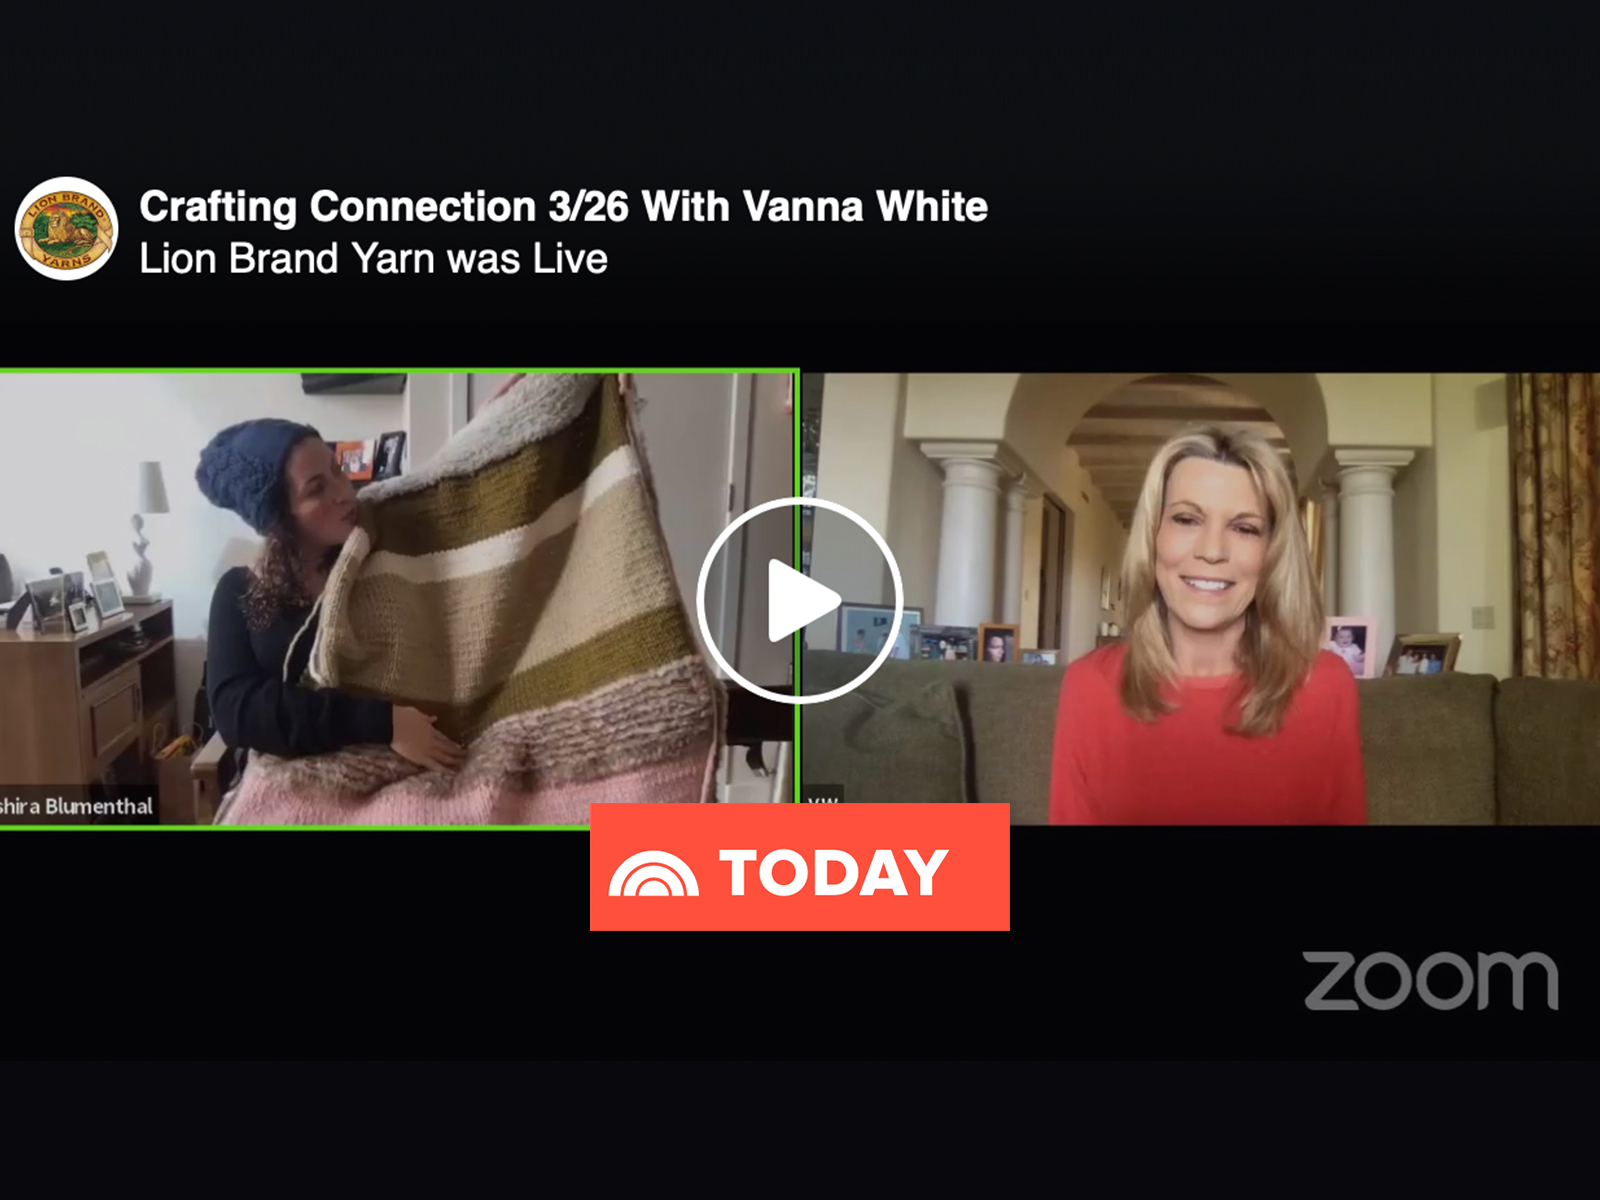 Still image from Zoom call with Shira and Vanna White